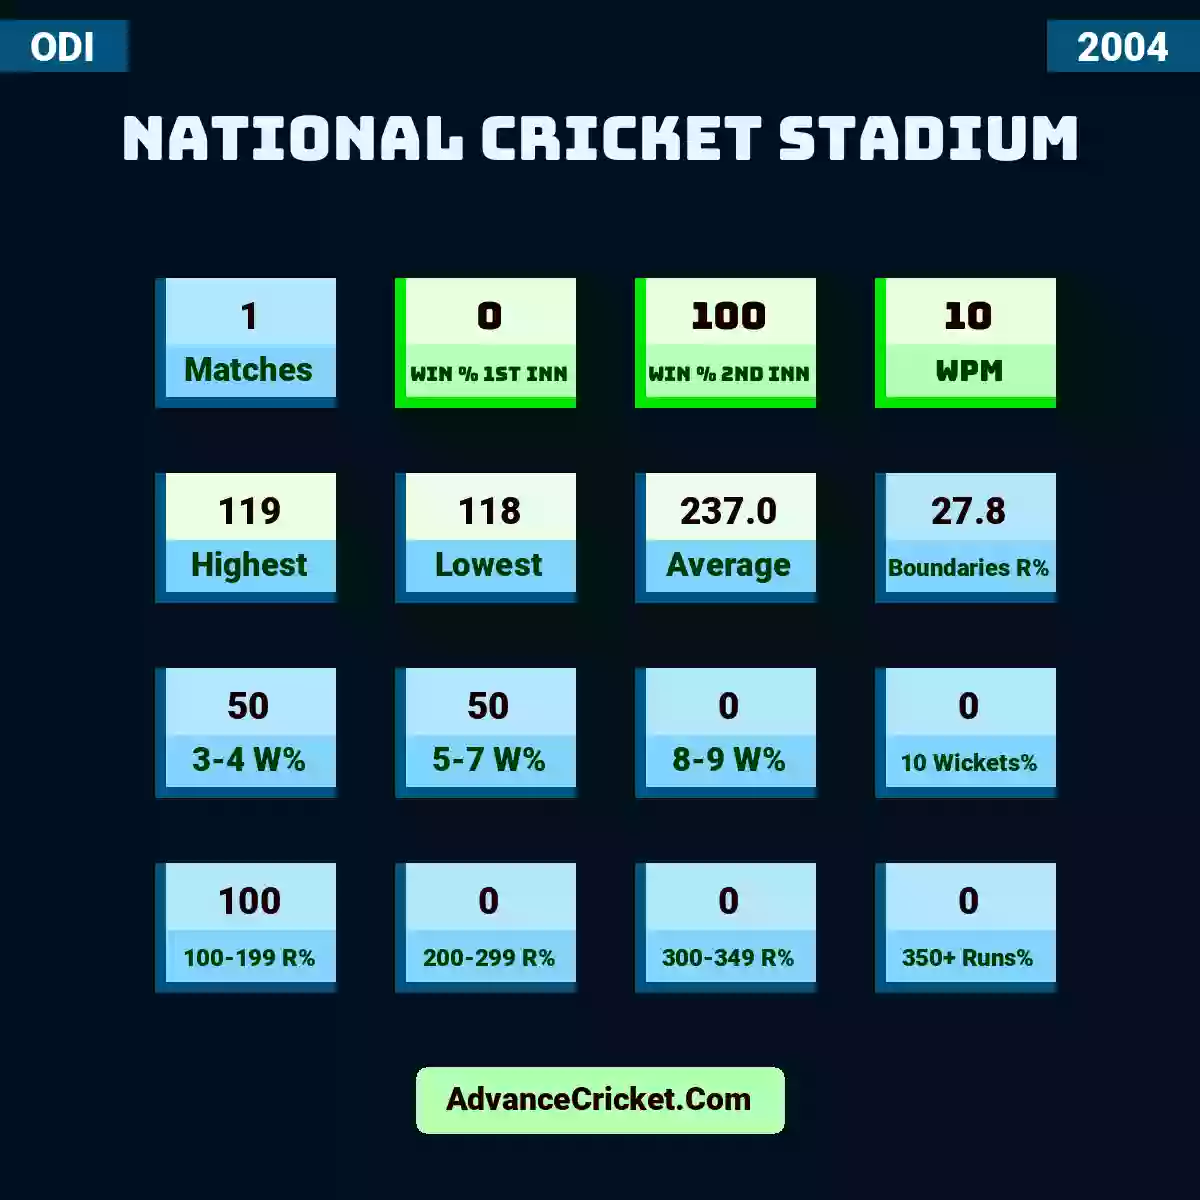 Image showing National Cricket Stadium with Matches: 1, Win % 1st Inn: 0, Win % 2nd Inn: 100, WPM: 10, Highest: 119, Lowest: 118, Average: 237.0, Boundaries R%: 27.8, 3-4 W%: 50, 5-7 W%: 50, 8-9 W%: 0, 10 Wickets%: 0, 100-199 R%: 100, 200-299 R%: 0, 300-349 R%: 0, 350+ Runs%: 0.